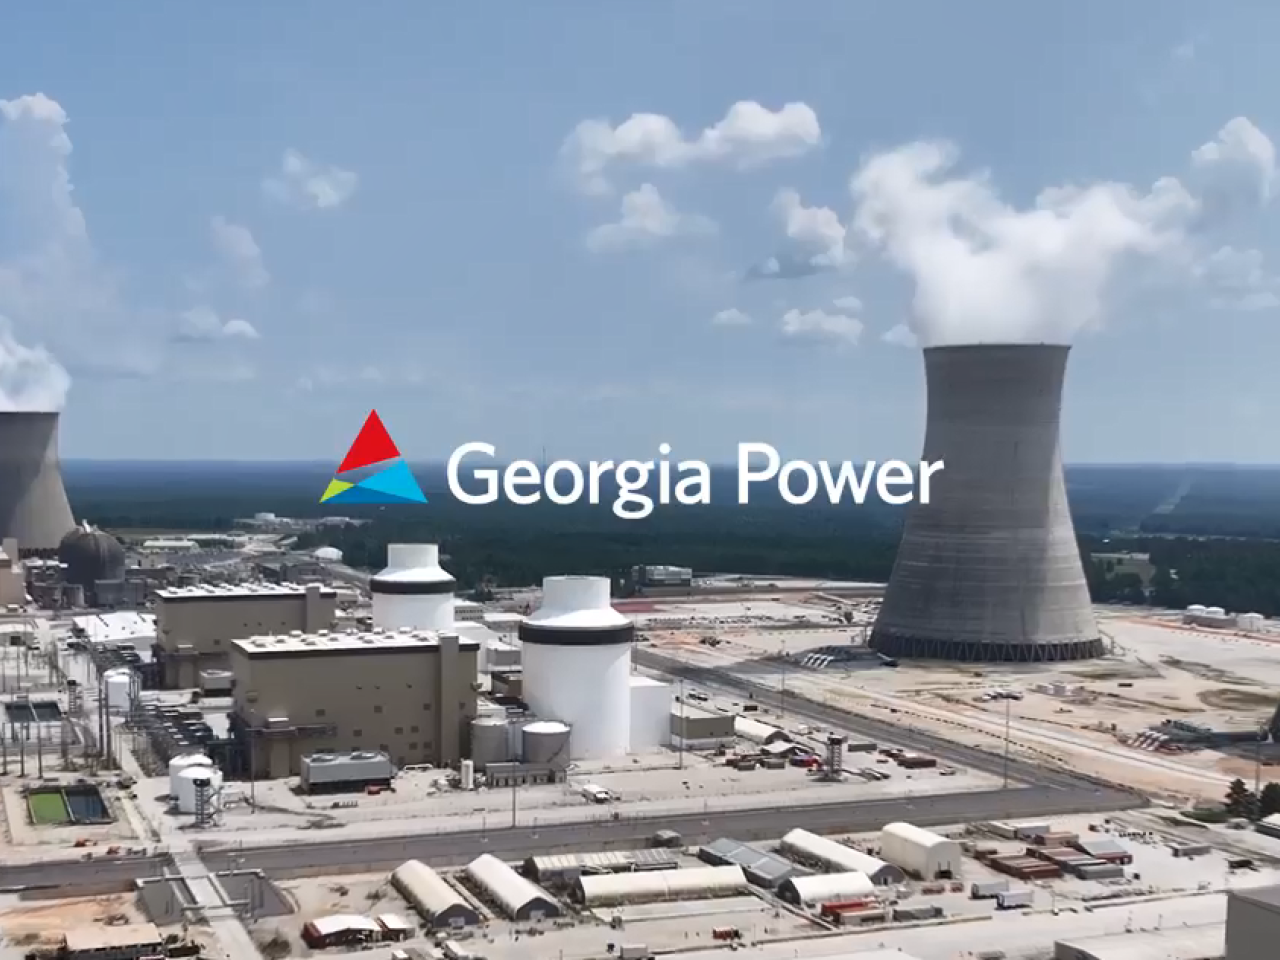 "Georgia Power" over an aerial view of a nuclear power plant.